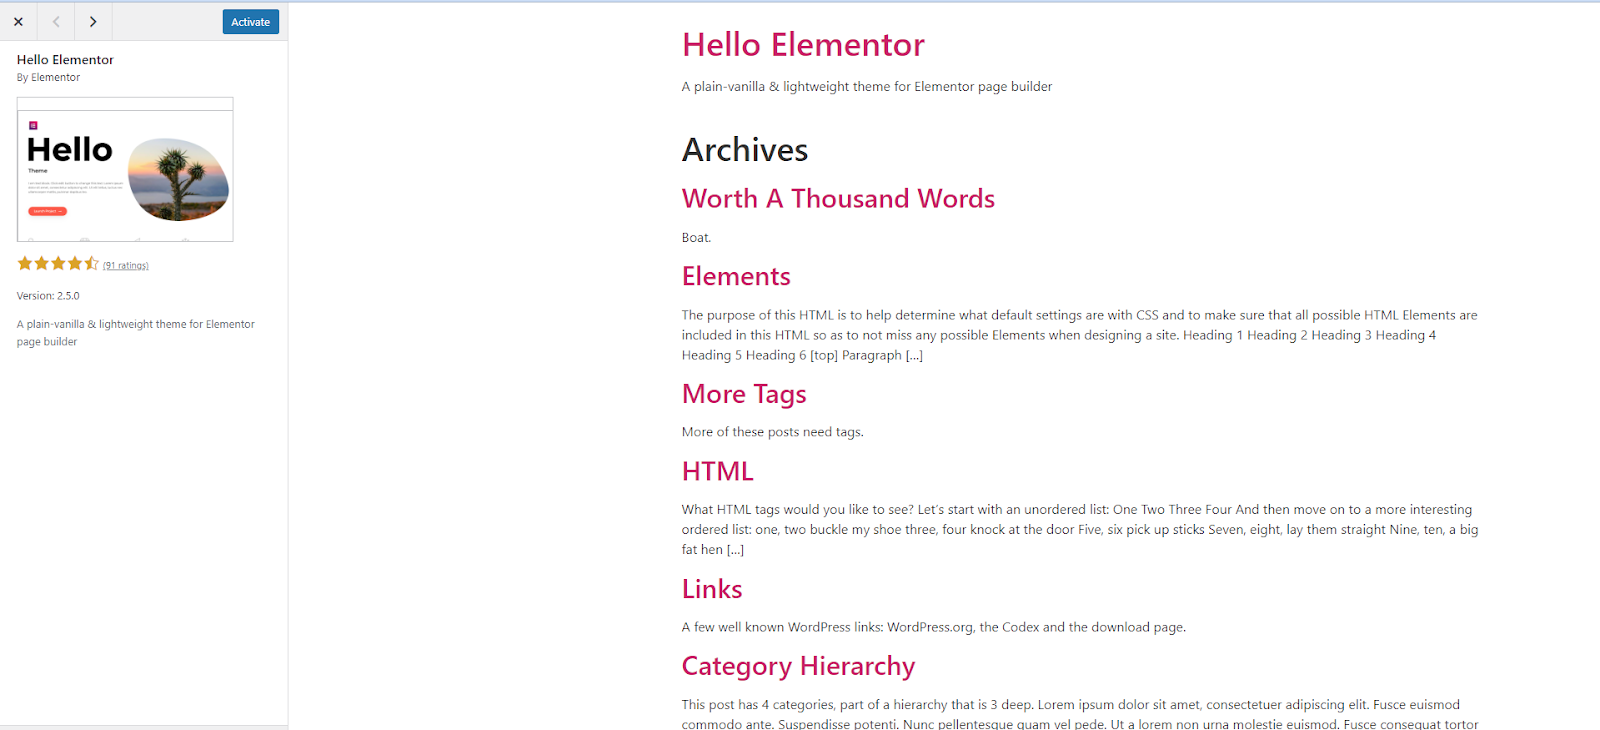 Screenshot showing the Elementor Hello theme layout before any customization.